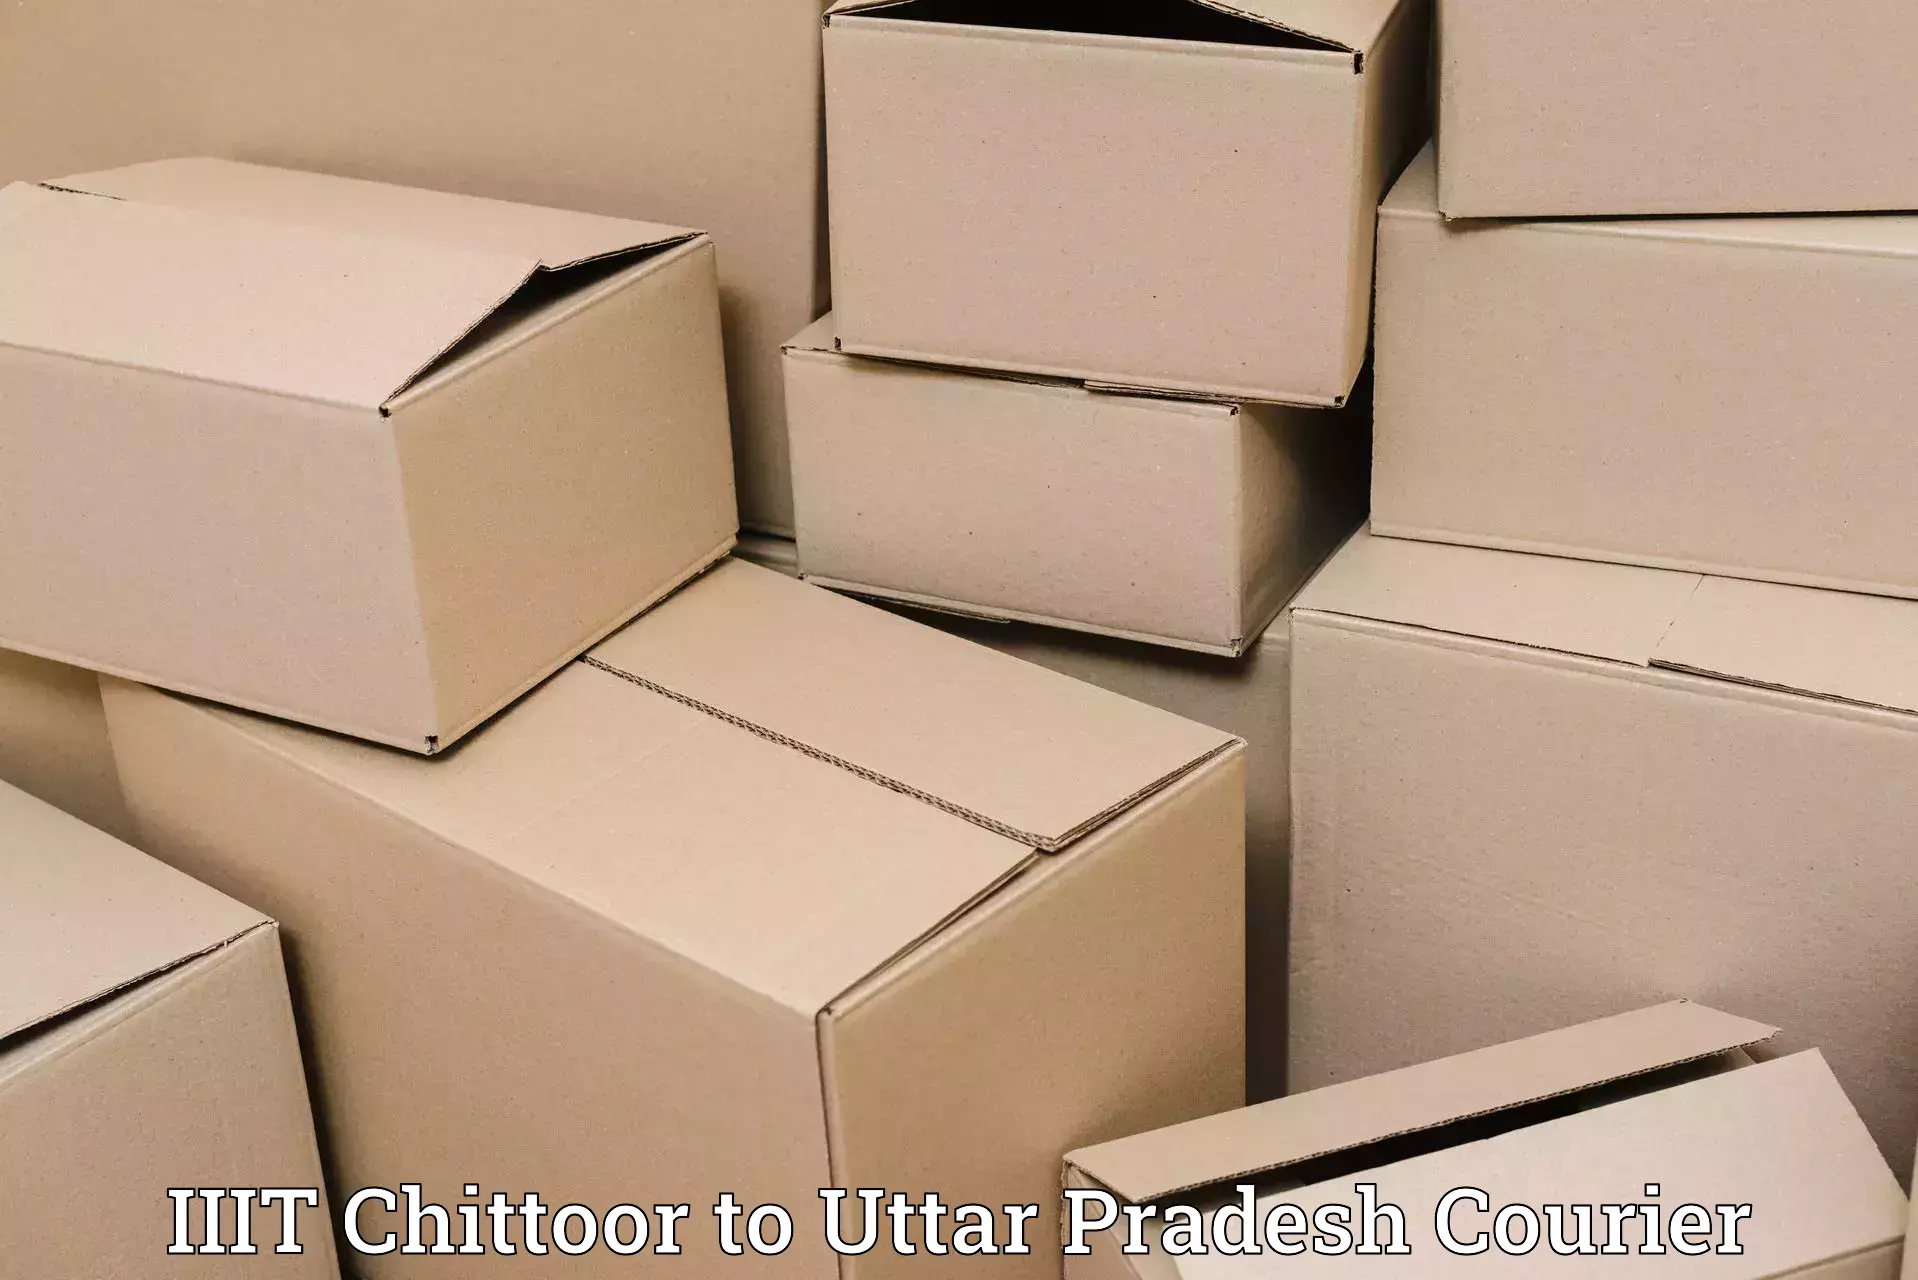 Domestic courier IIIT Chittoor to Amethi